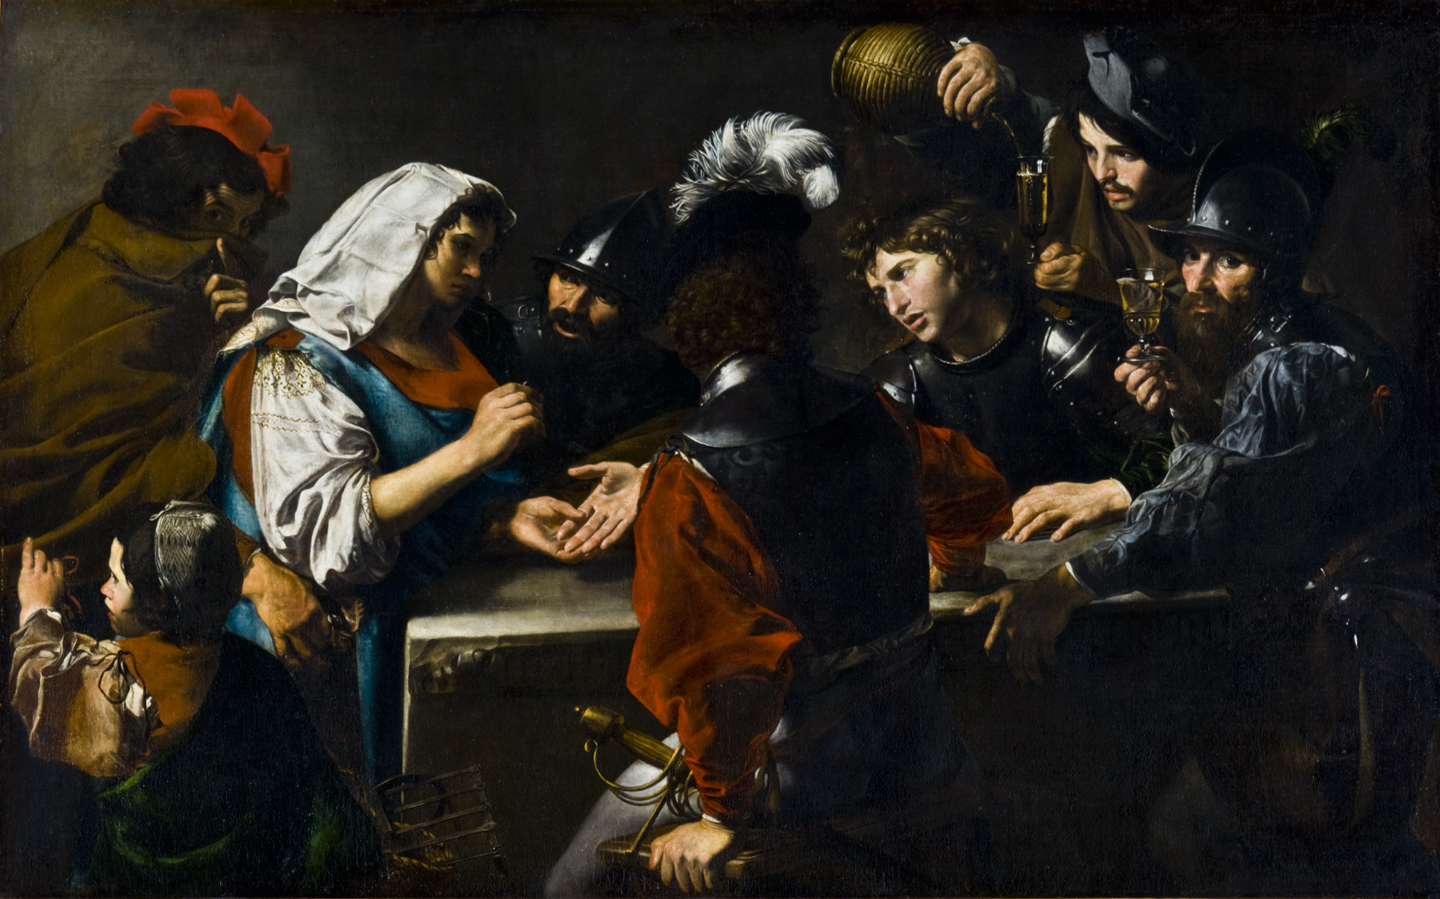 Fortune Teller with Soldiers by Valentin de Boulogne - c. 1620 - 149.5 x 238.4 cm Toledo Museum of Art